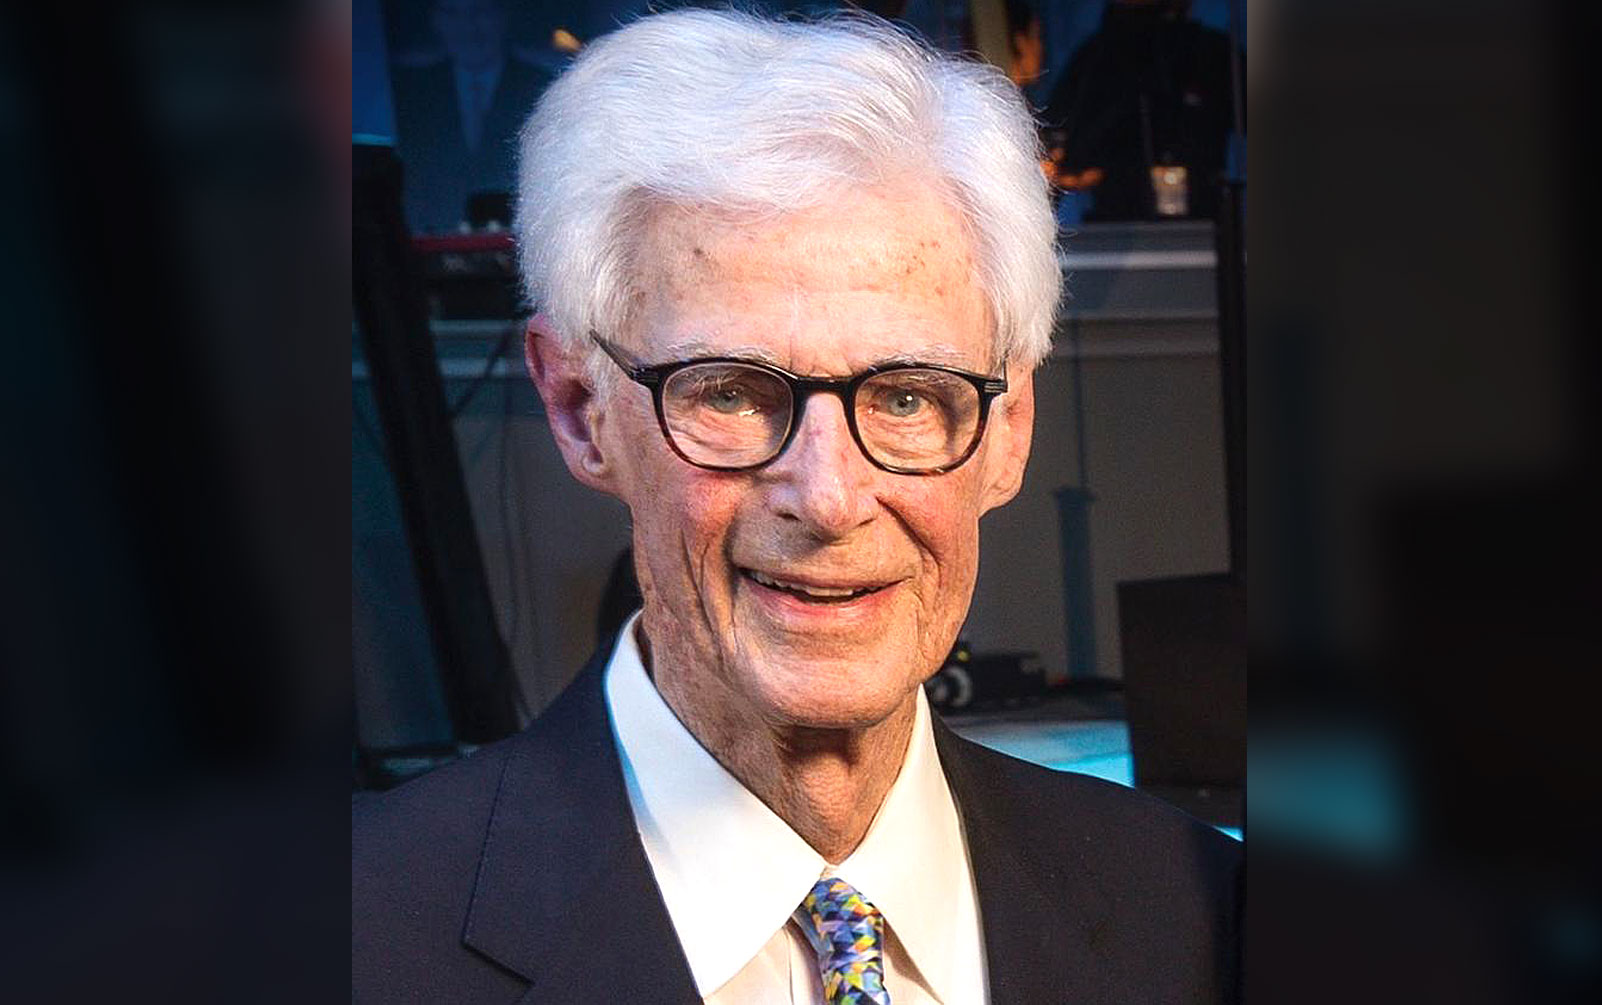 Former MD Anderson President Dr. Charles A. LeMaistre Passes Away at 92